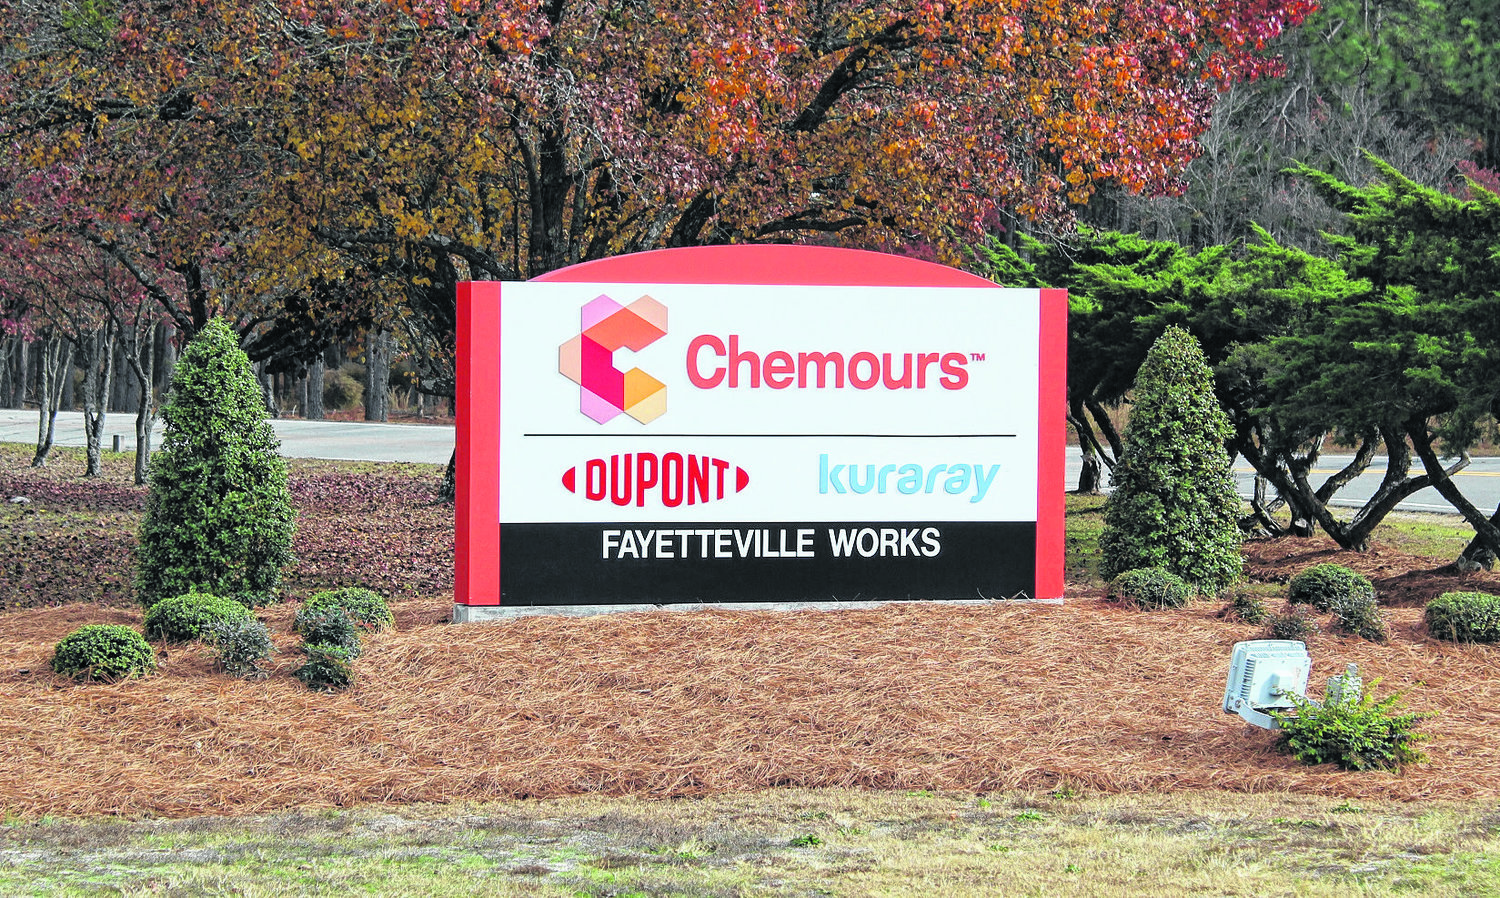 Chemours has applied for a state permit to build an underground barrier wall along the Cape Fear River near its facility in southern Cumberland County to help reduce PFAS groundwater contamination. But some advocacy groups and residents say the permit doesn’t go far enough.